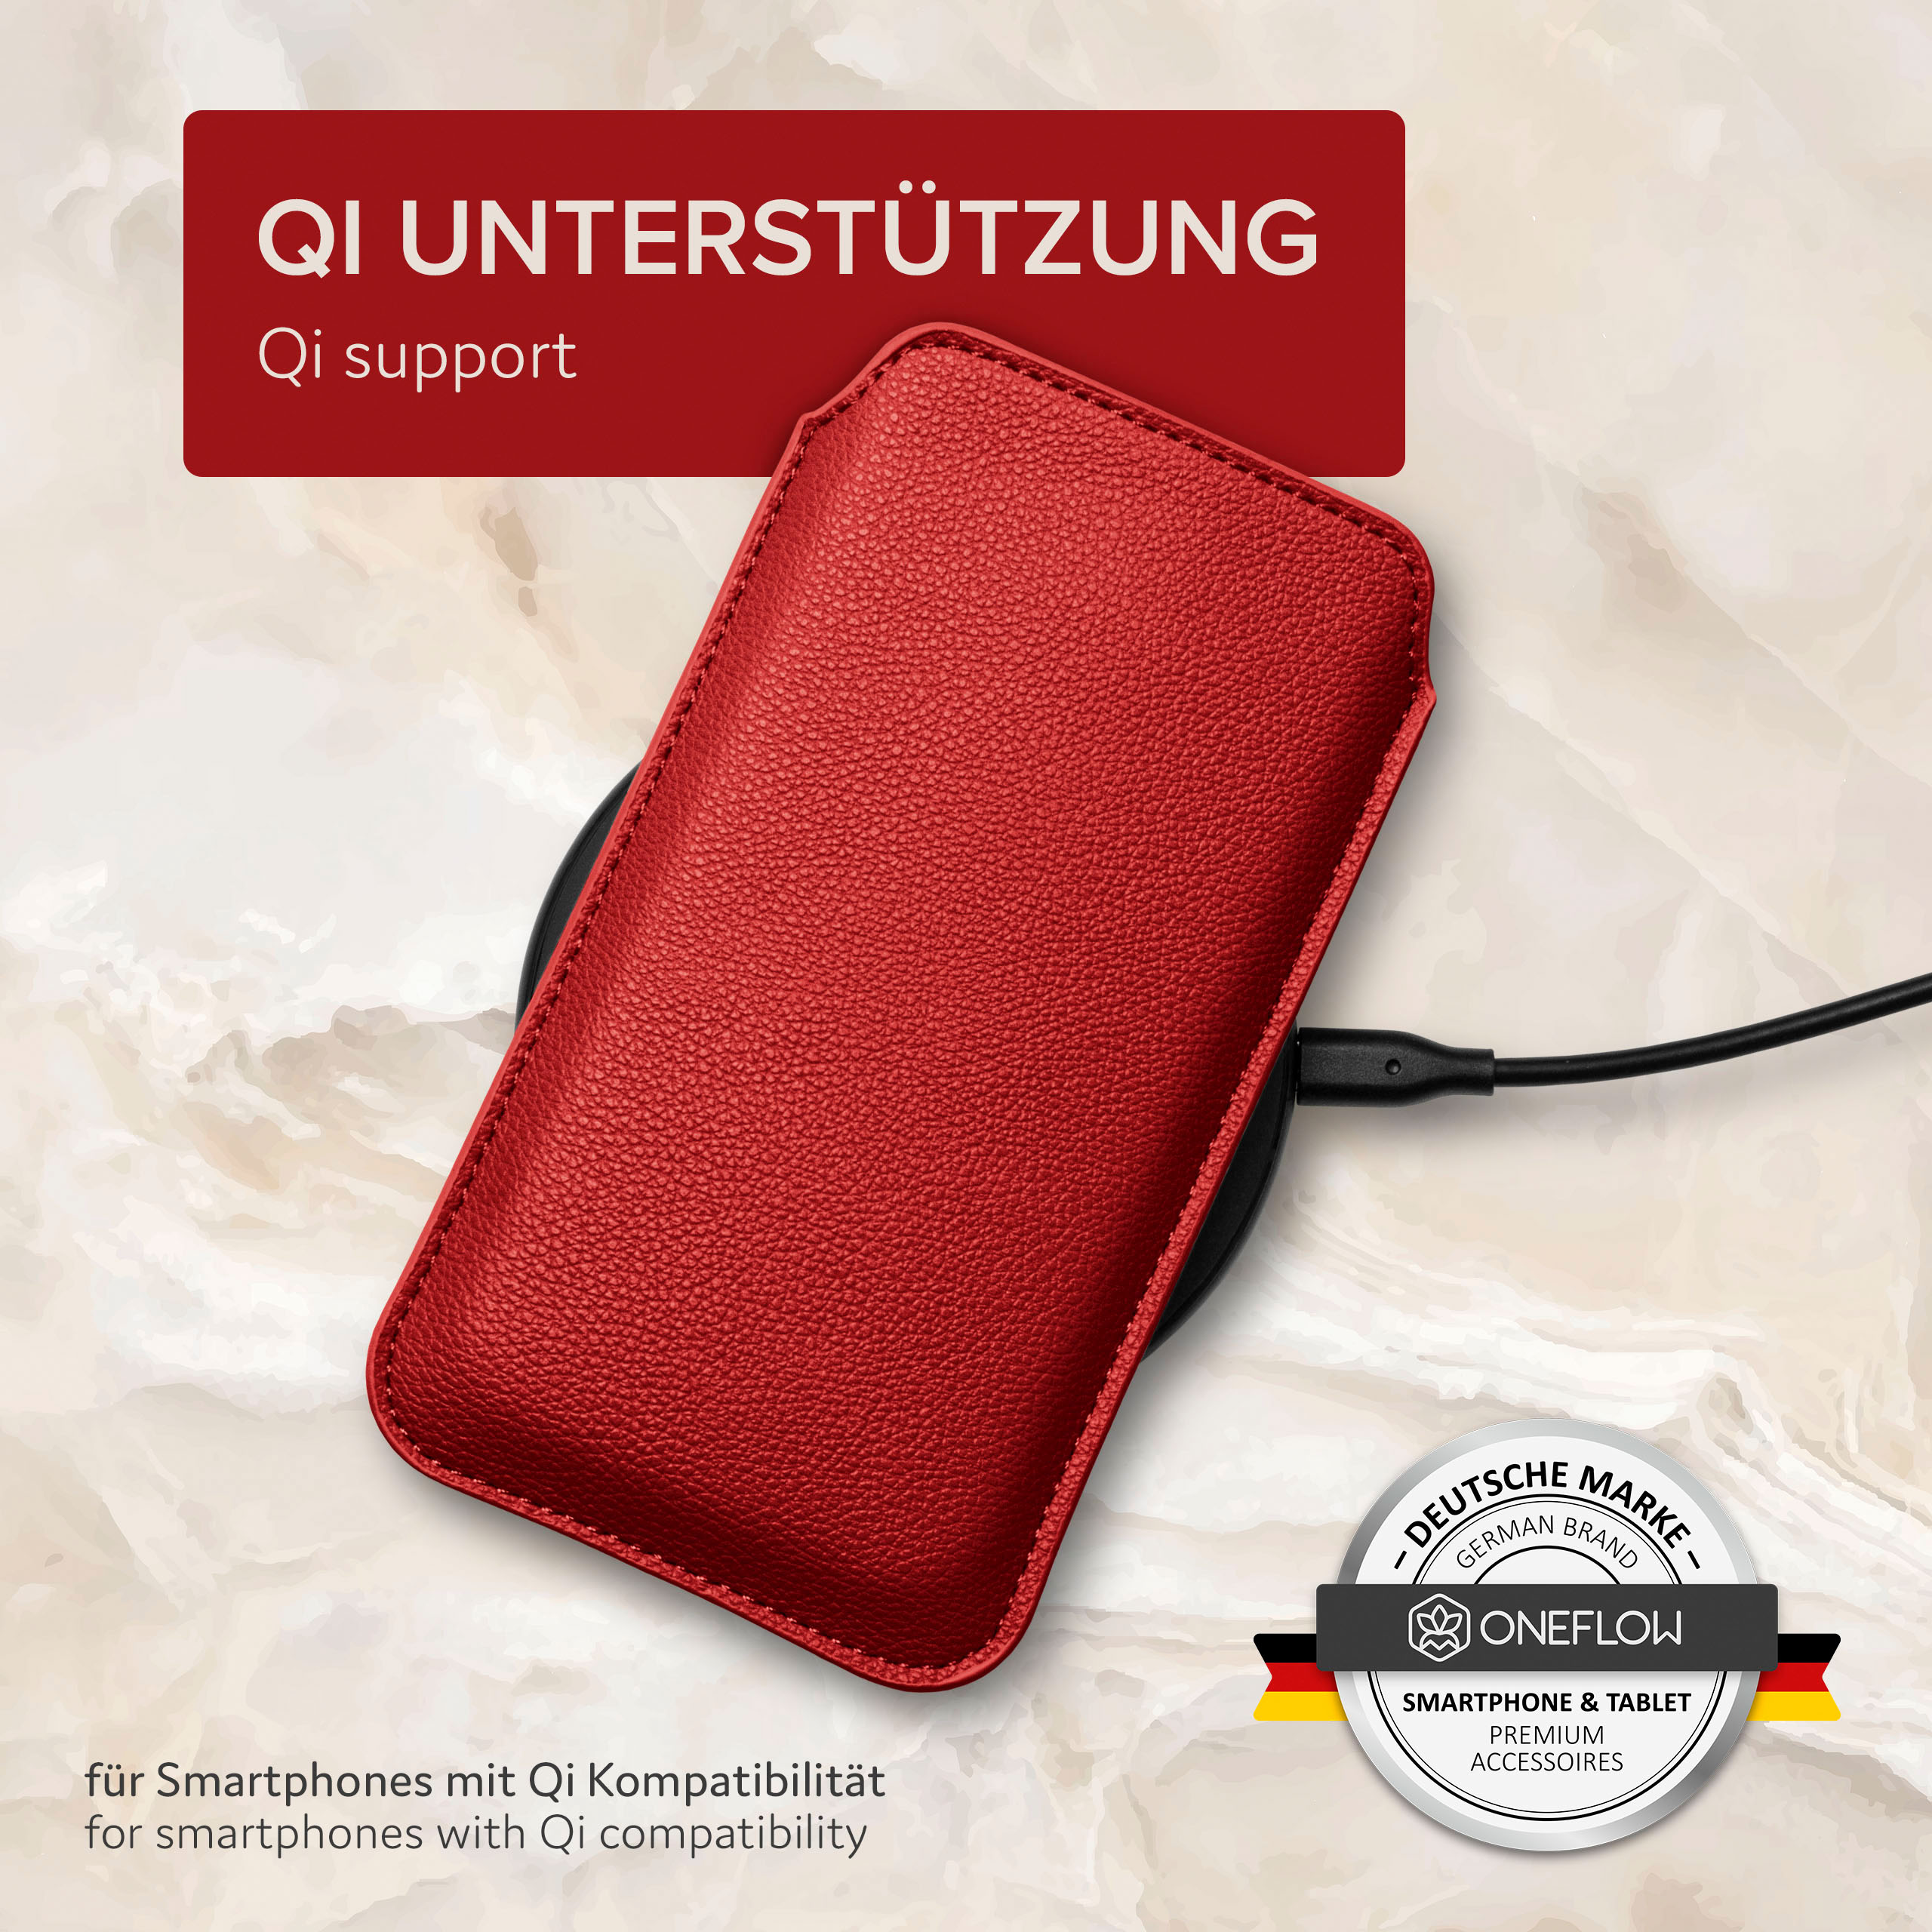 Compact, mit Z3 ONEFLOW Einsteckhülle Zuglasche, Cover, Sony, Xperia Full Dunkelrot